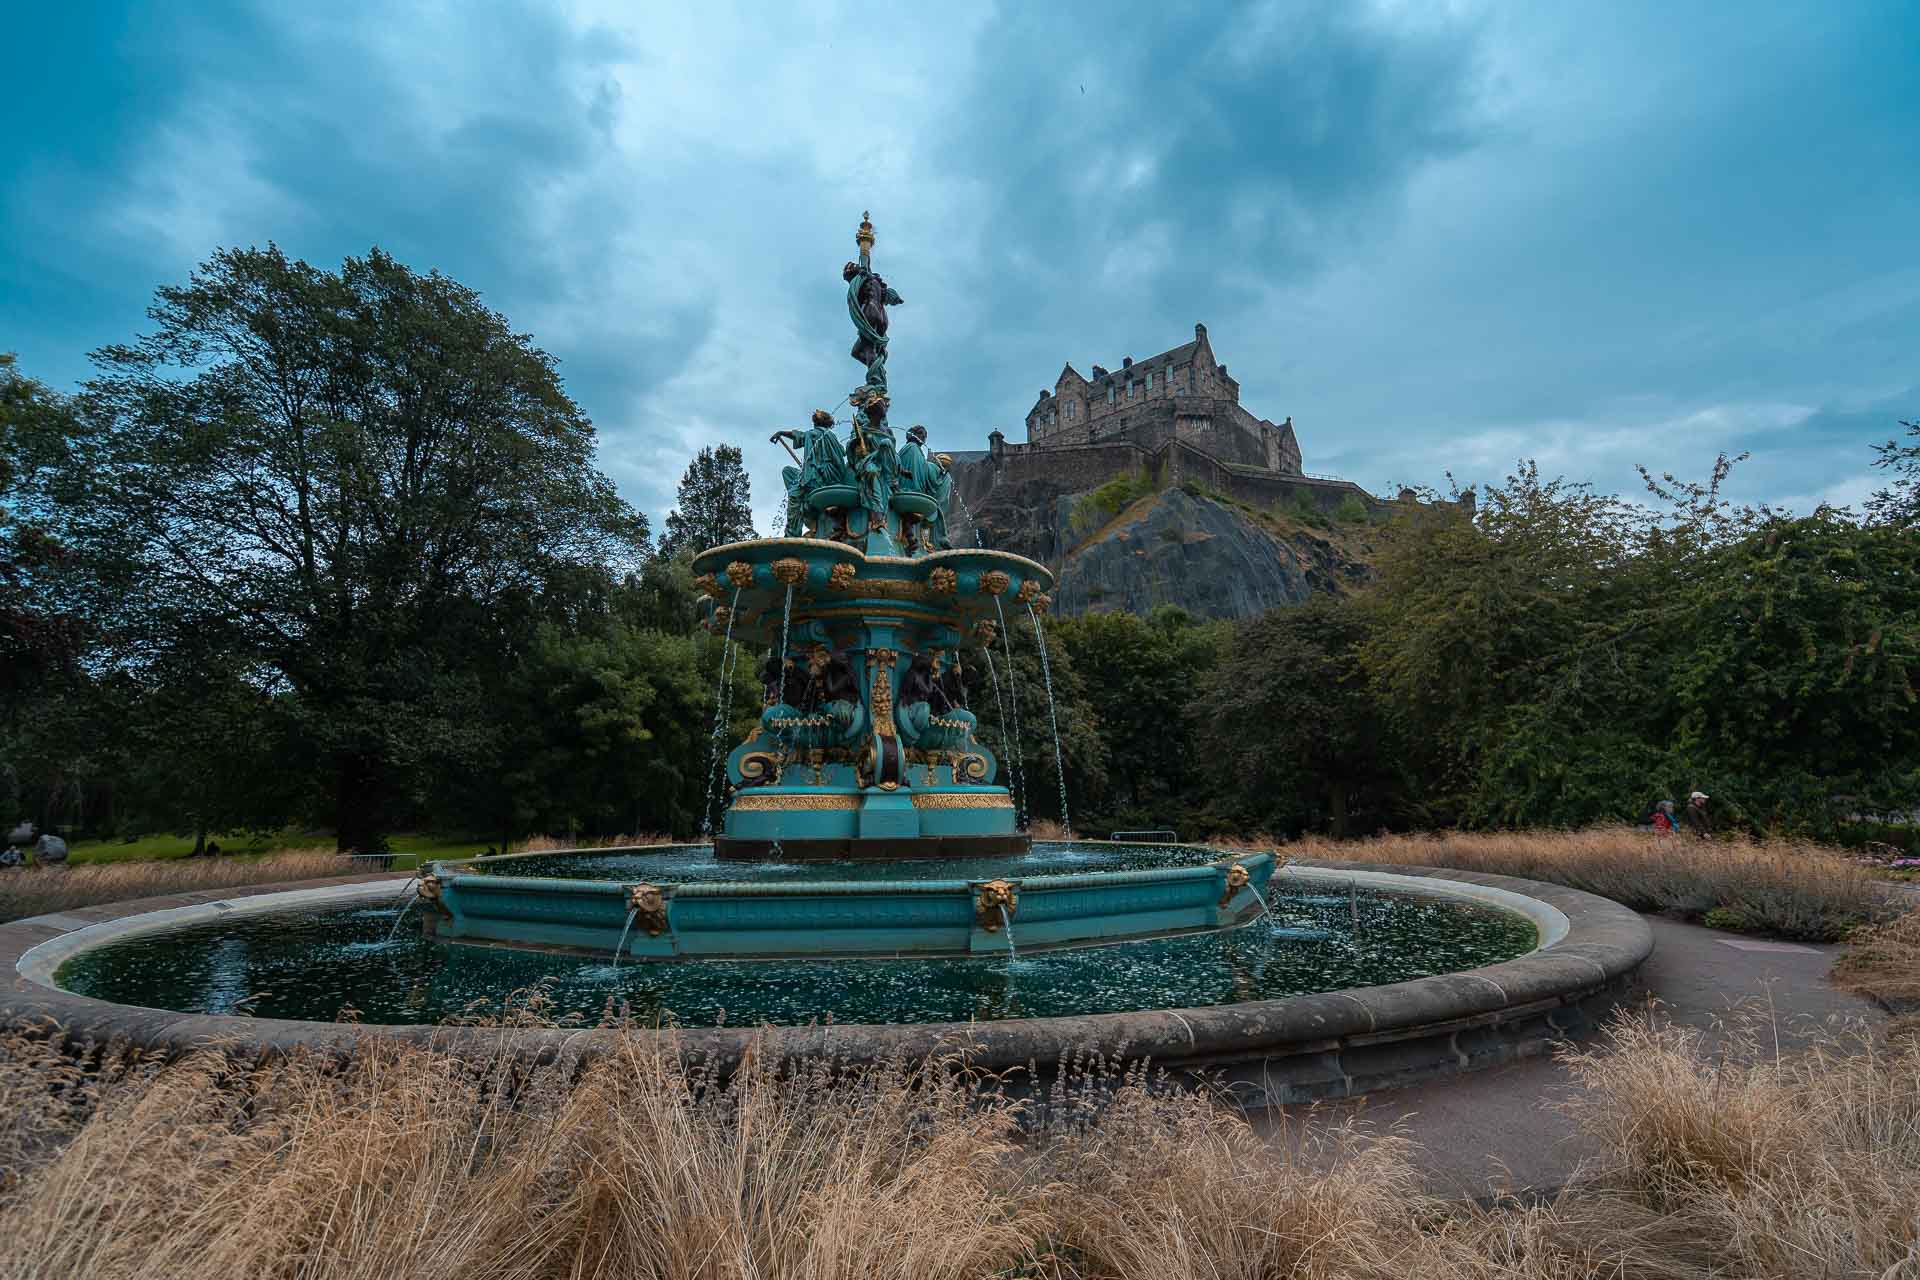 Fountain with the castle of Edinburgh in the back